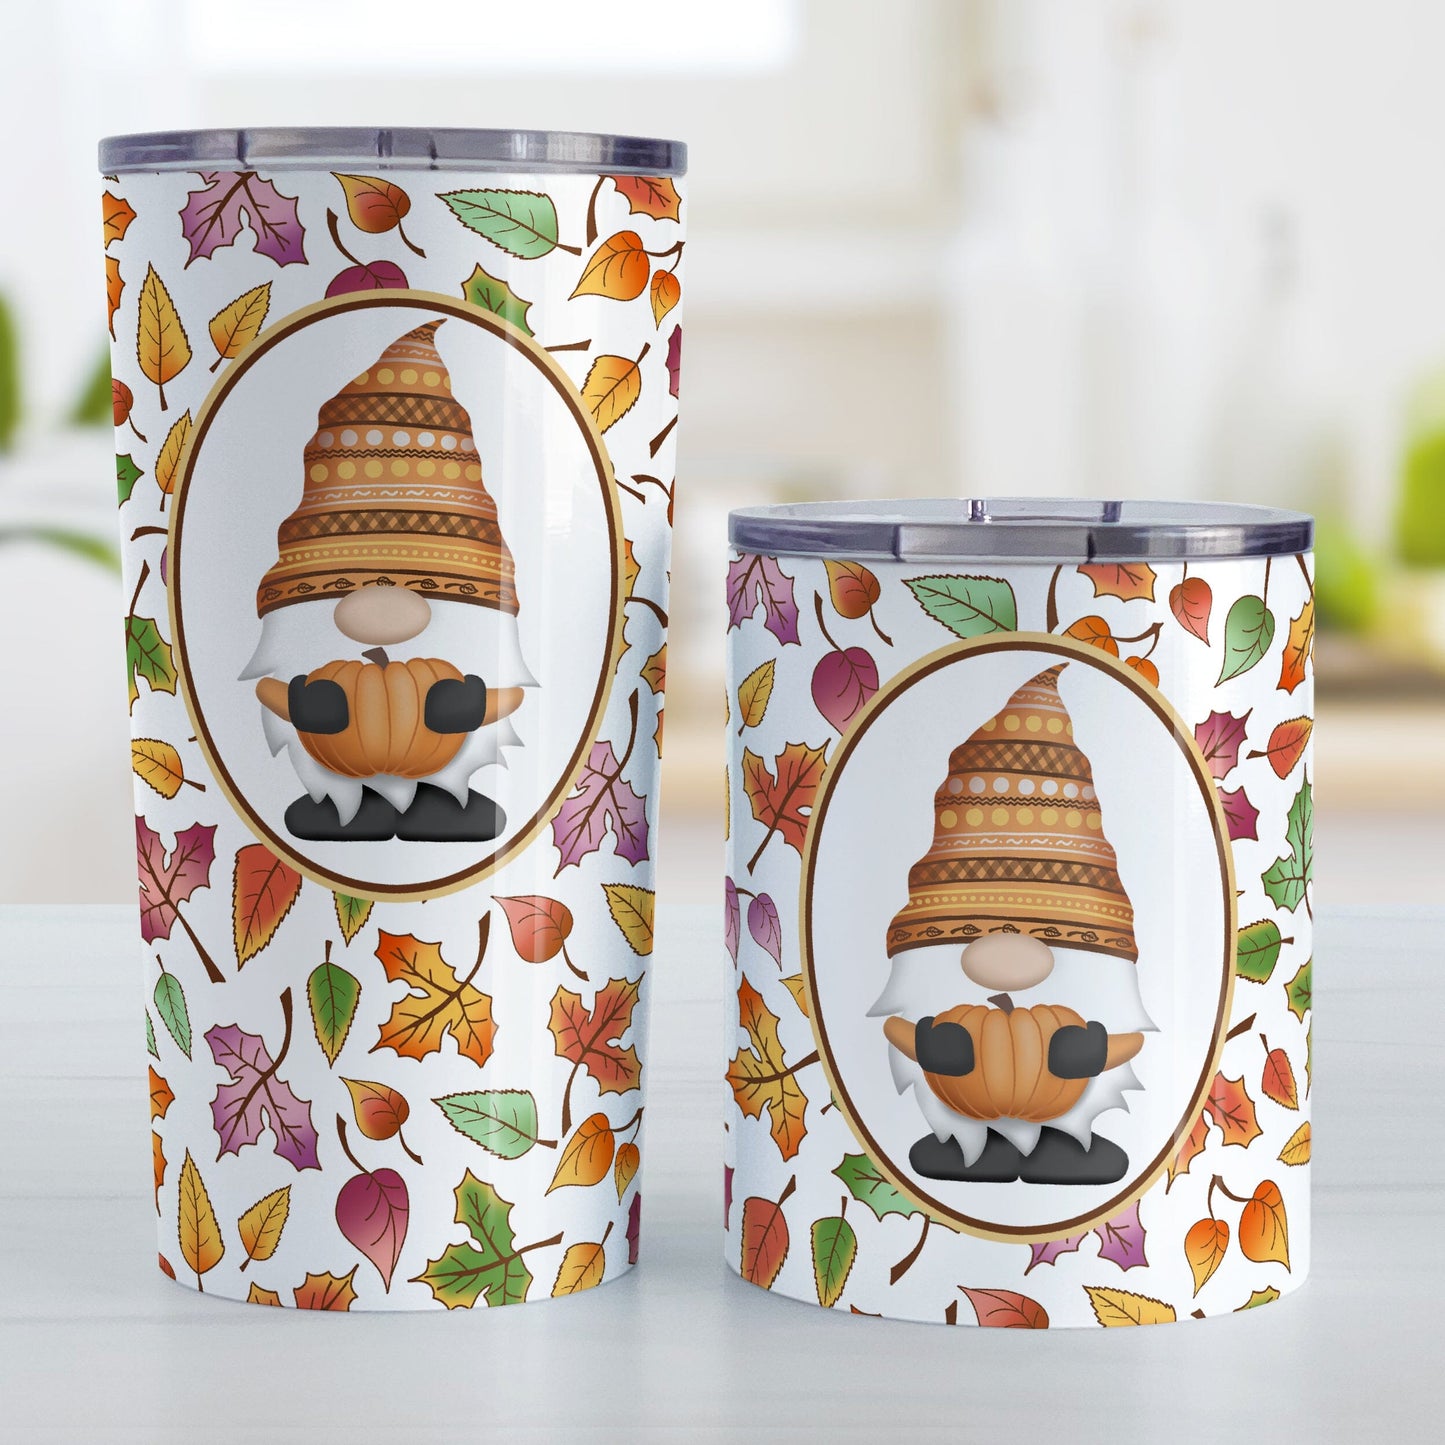 Orange Gnome Fall Leaves Tumbler Cup (20oz or 10oz) at Amy's Coffee Mugs. Stainless steel tumbler cups designed with an adorable orange hat gnome holding an orange pumpkin in a white oval over a pattern of leaves in different fall colors that wrap around the cups. Photo shows both sized cups next to each other on a table.